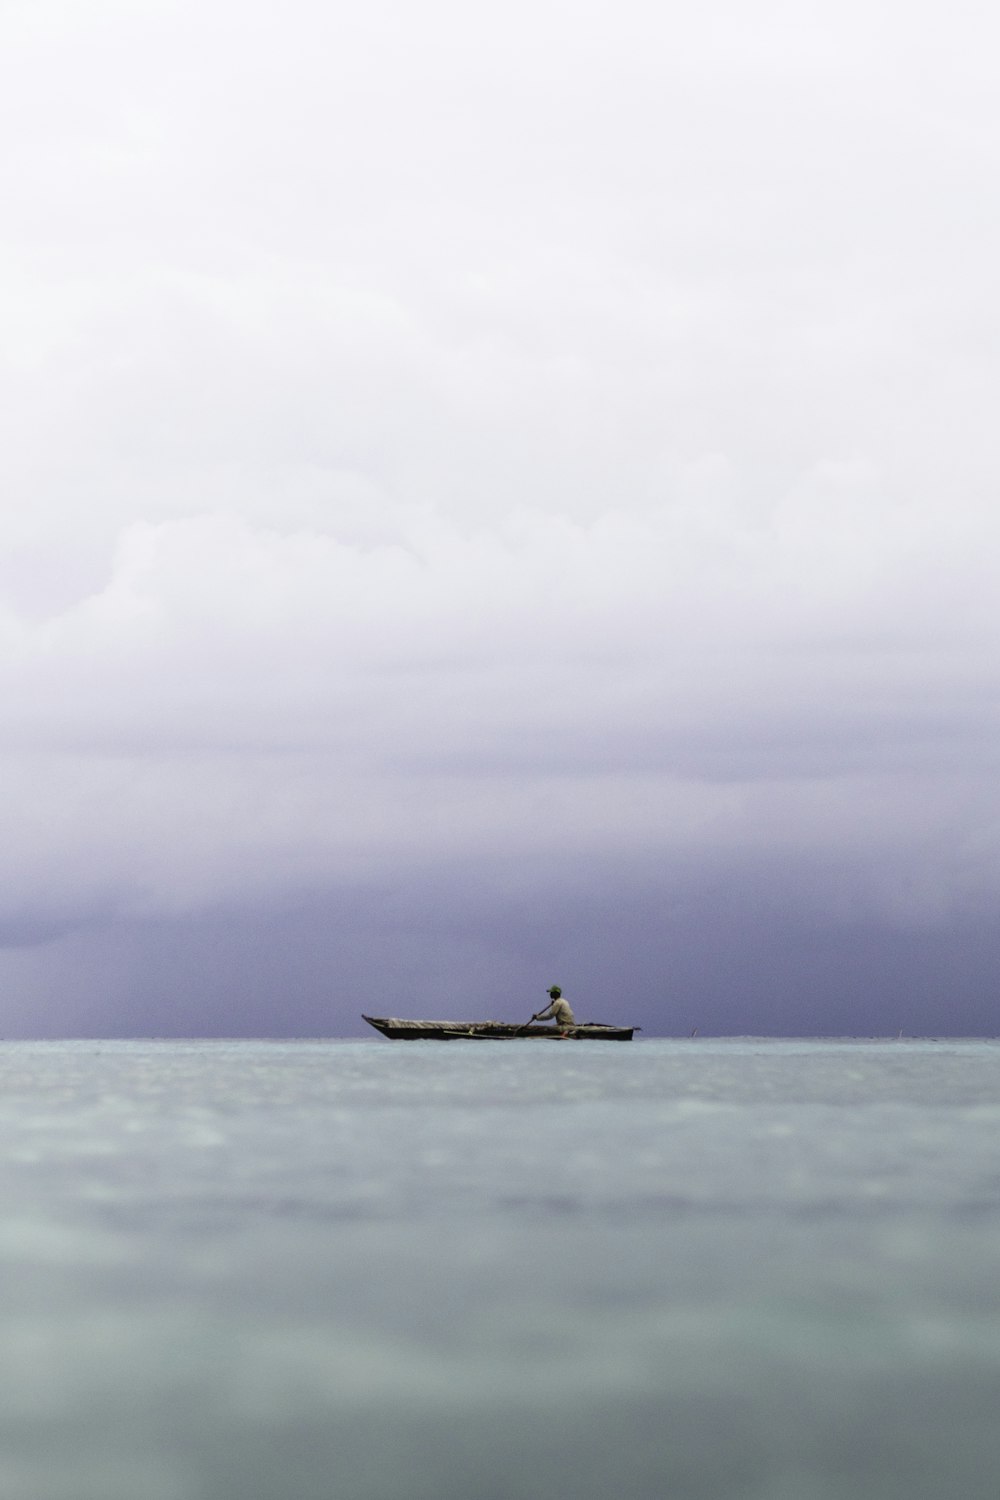 a man in a boat in the middle of the ocean